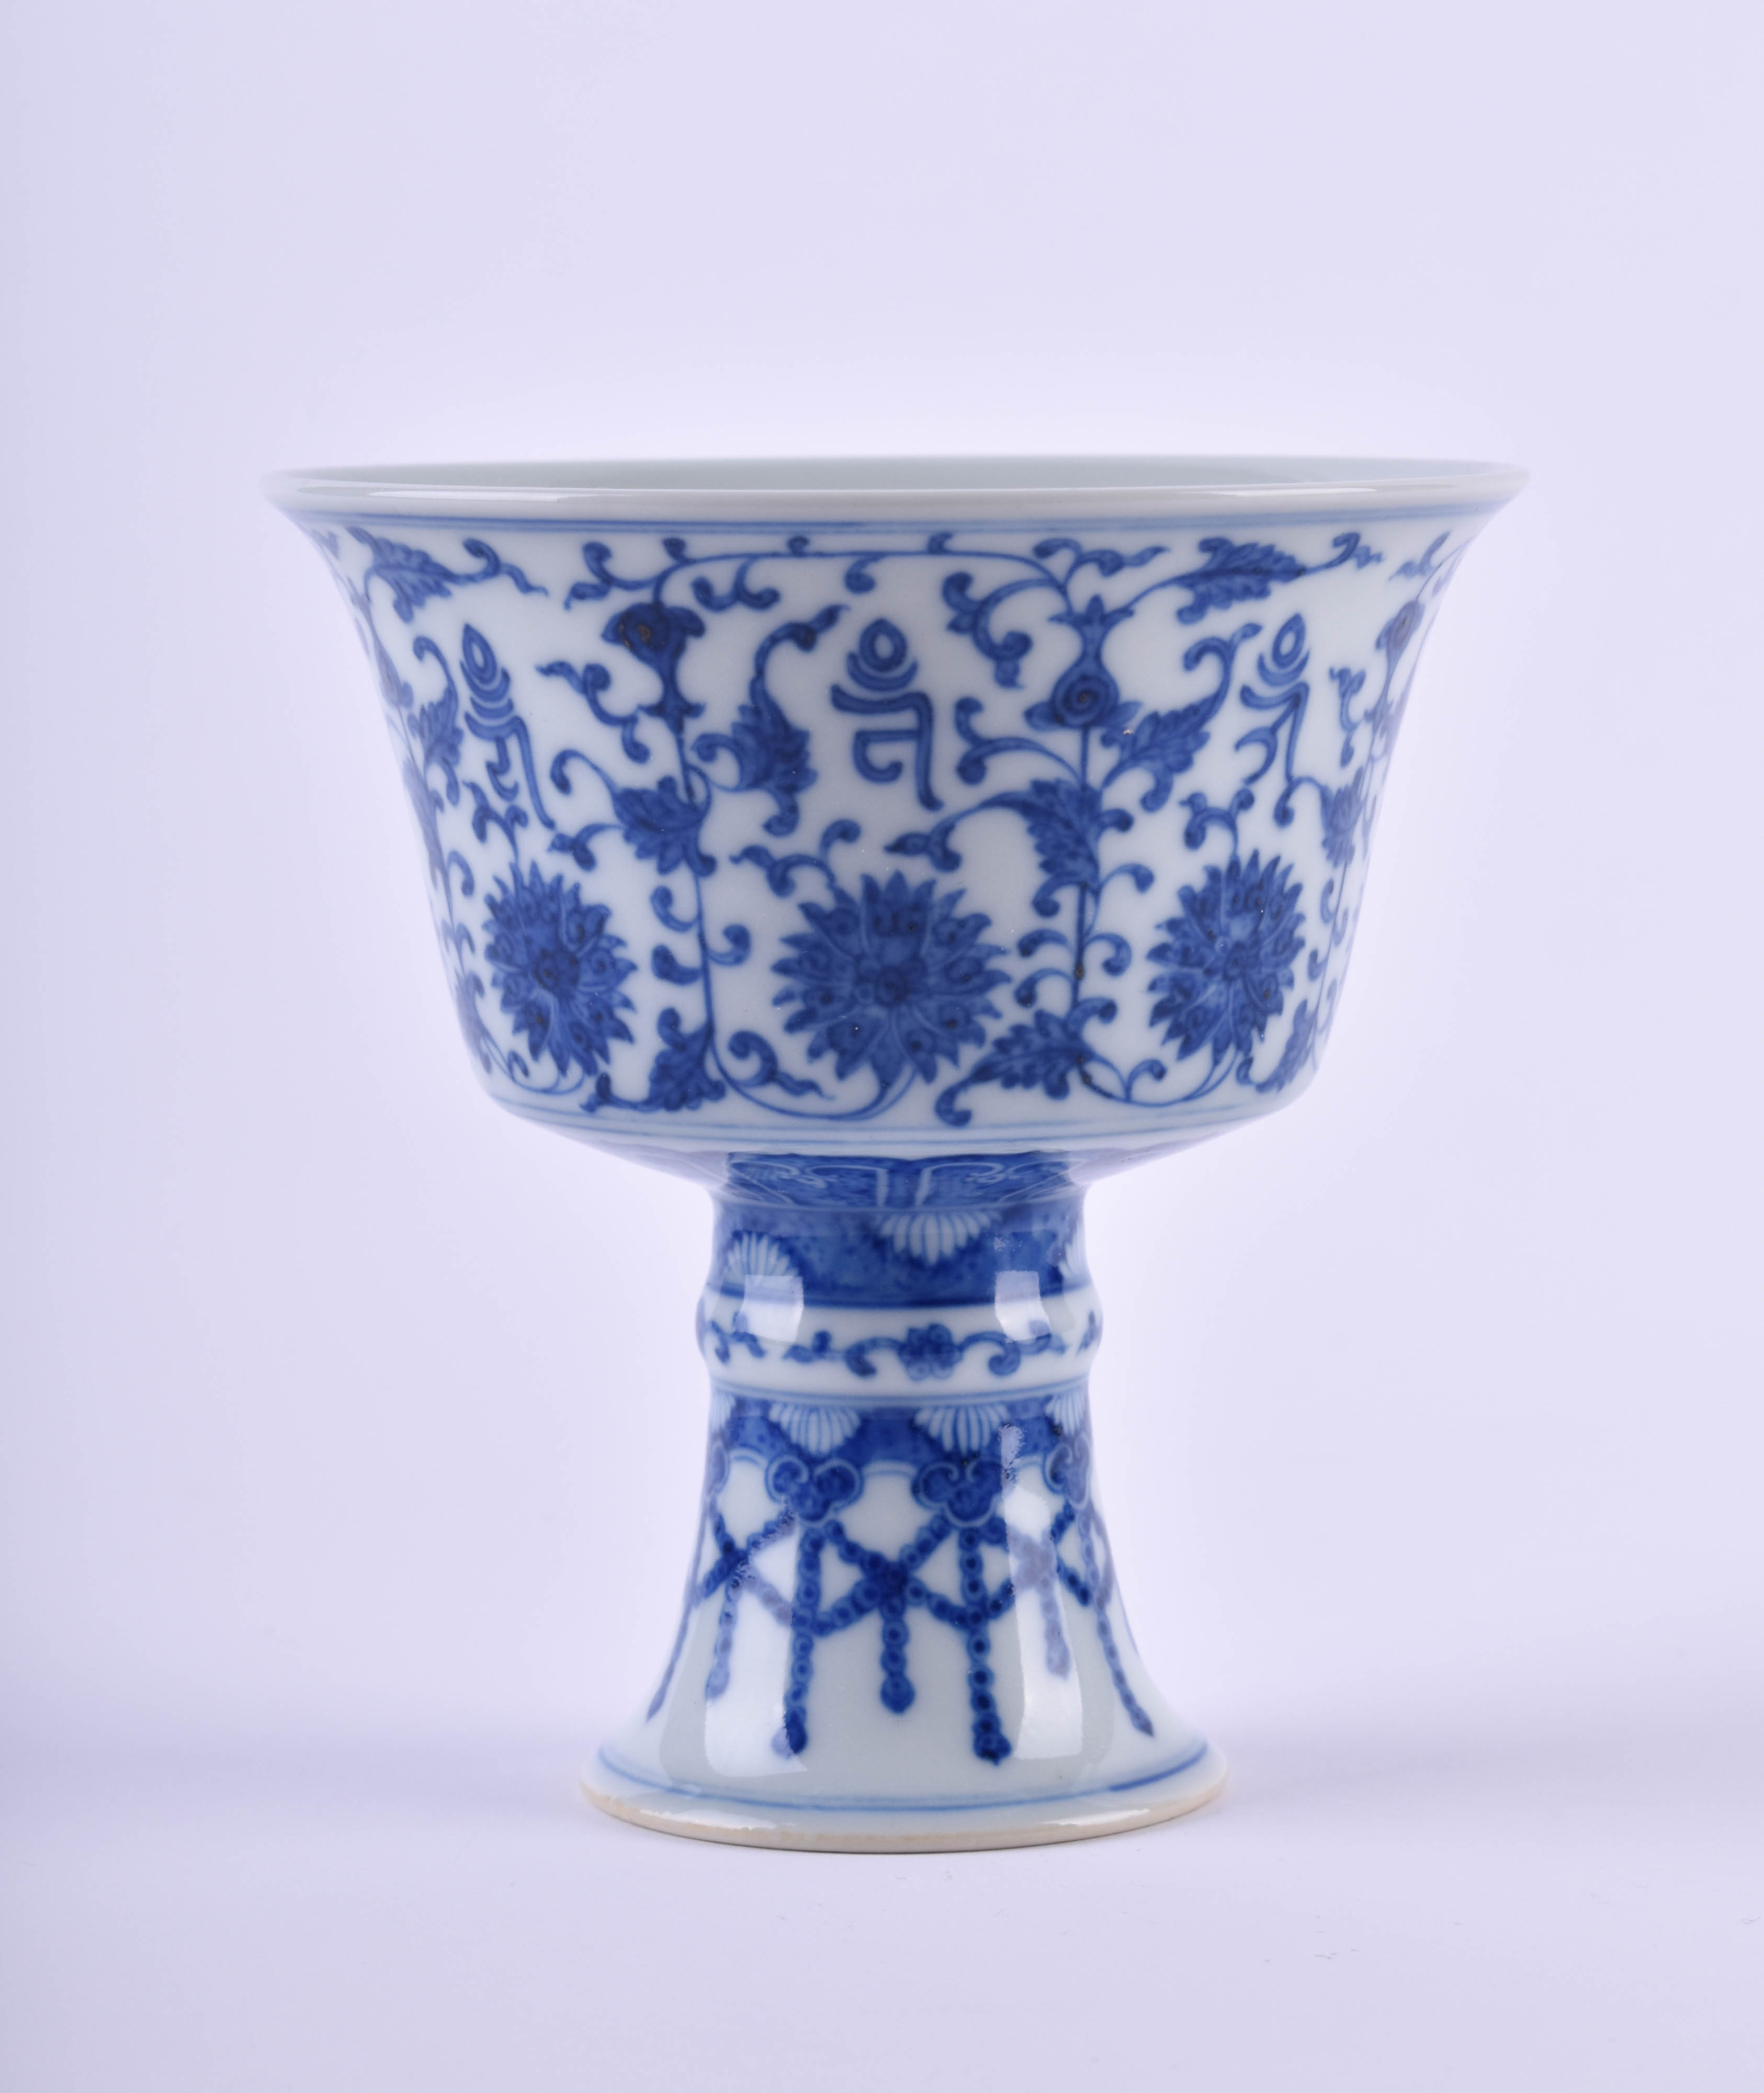  Footbowl China for Tibet Qing dynasty